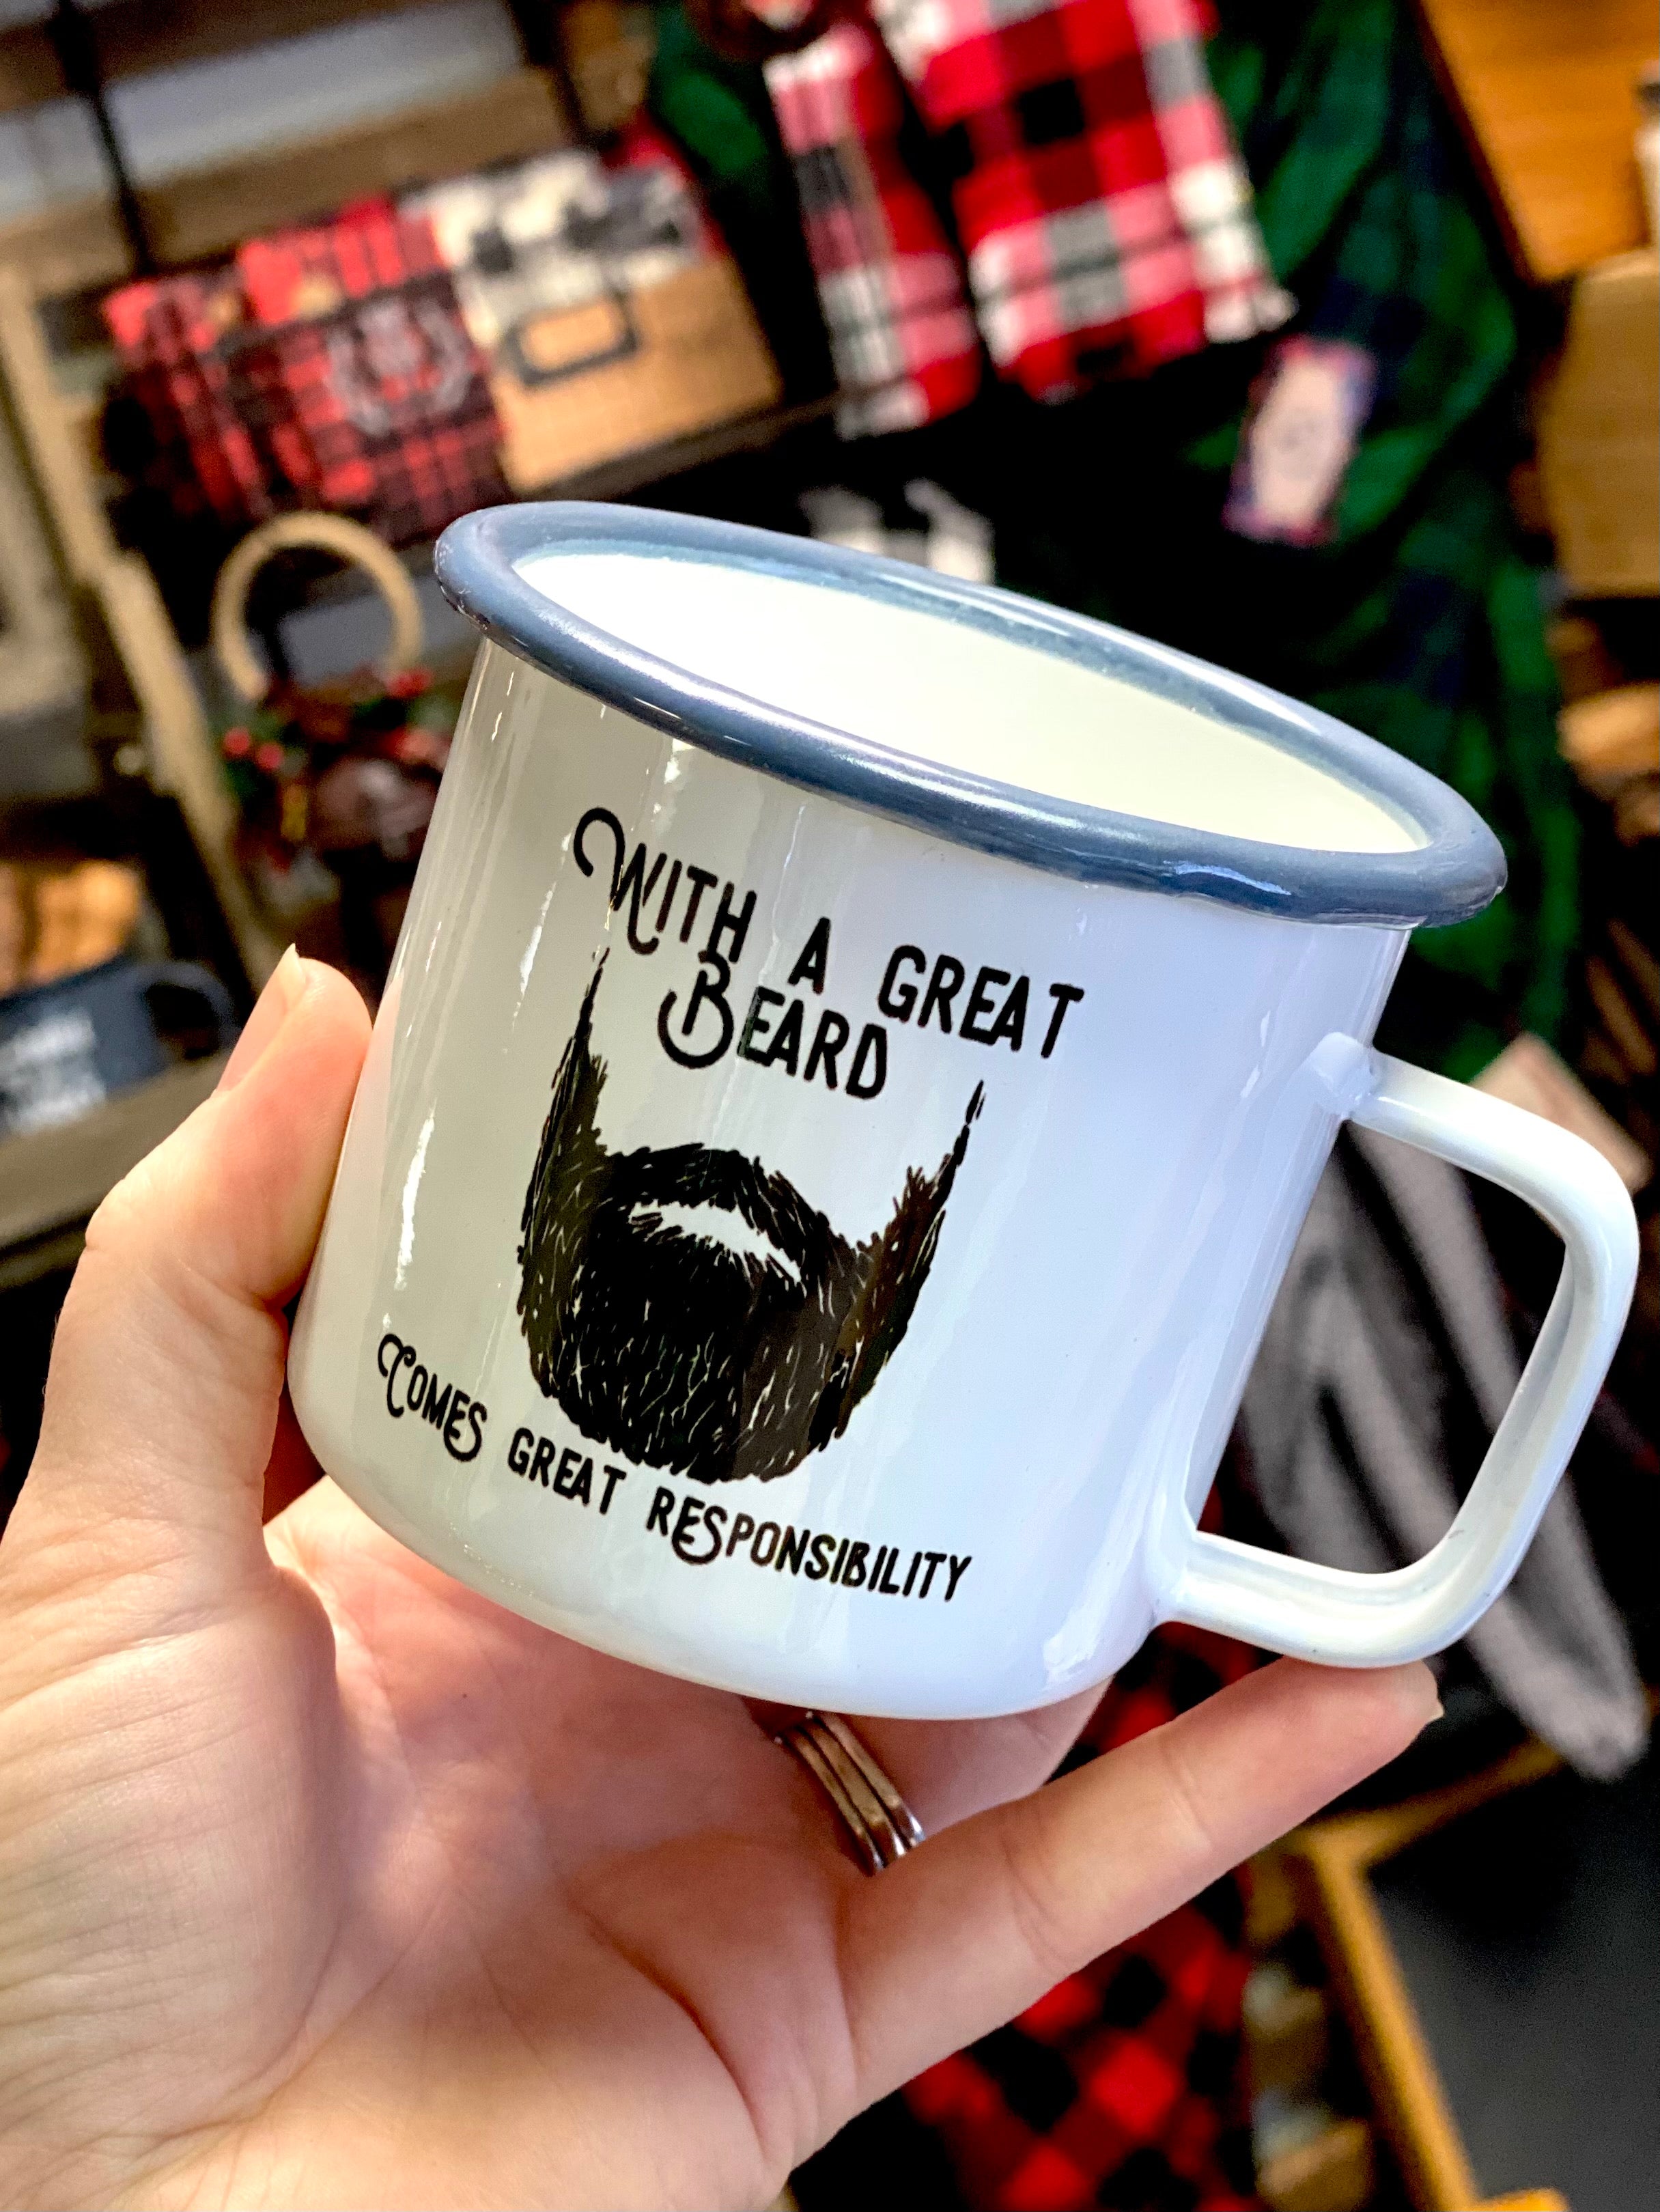 With a Great Beard Comes Great Responsibility Weathered Enamel Campfire Mug